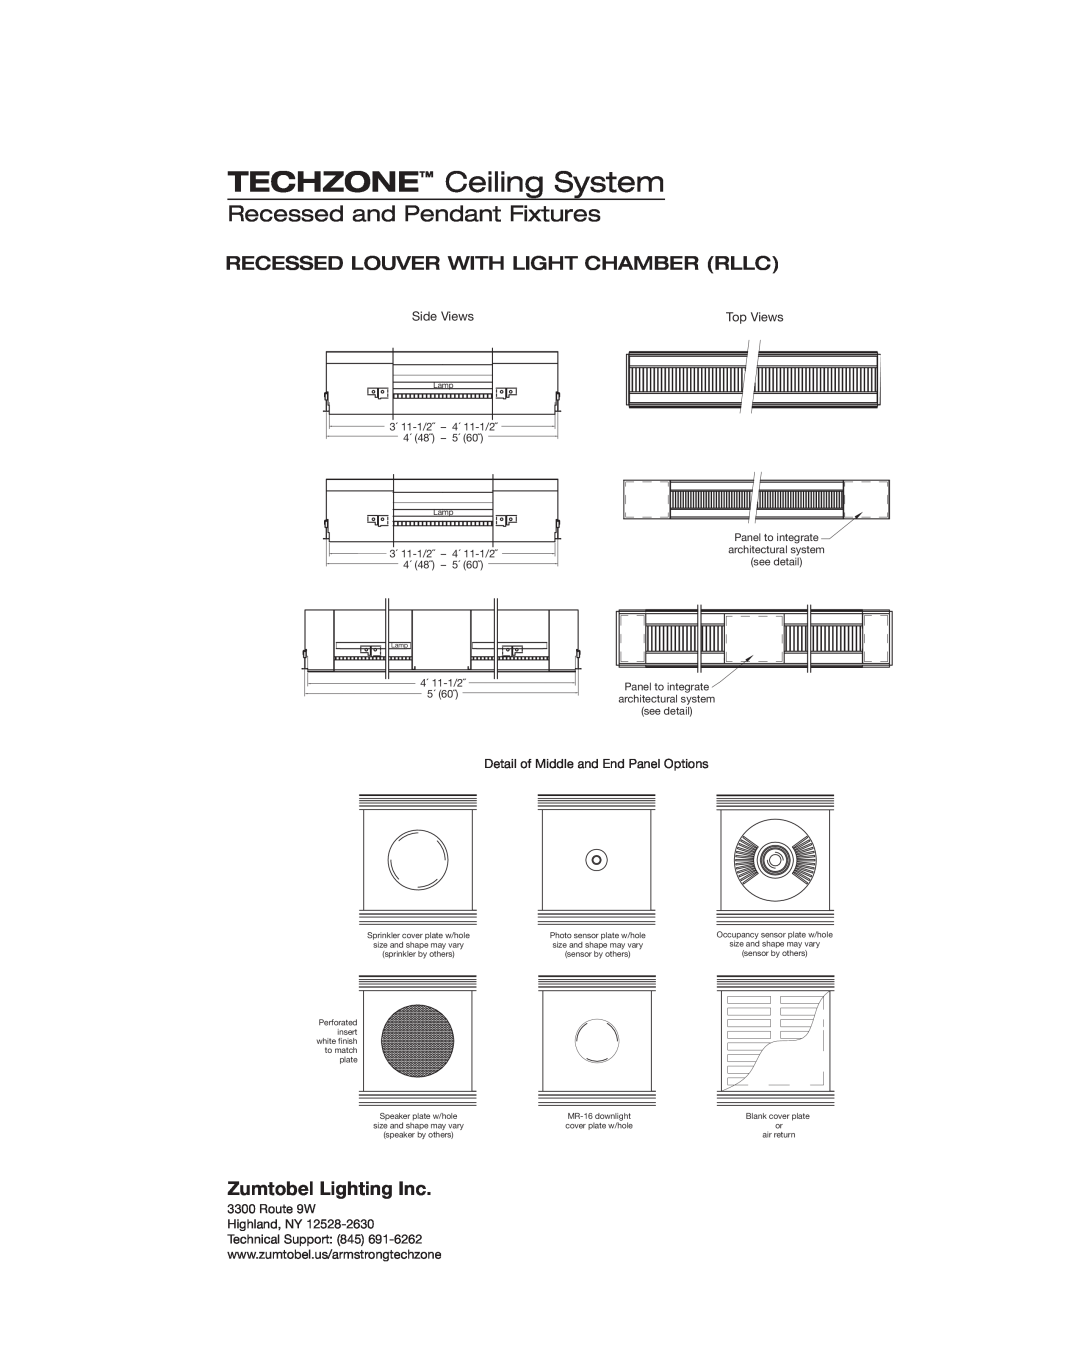 Armstrong World Industries Ceiling Lighting System TECHZONE Ceiling System, Recessed and Pendant Fixtures, Side Views 